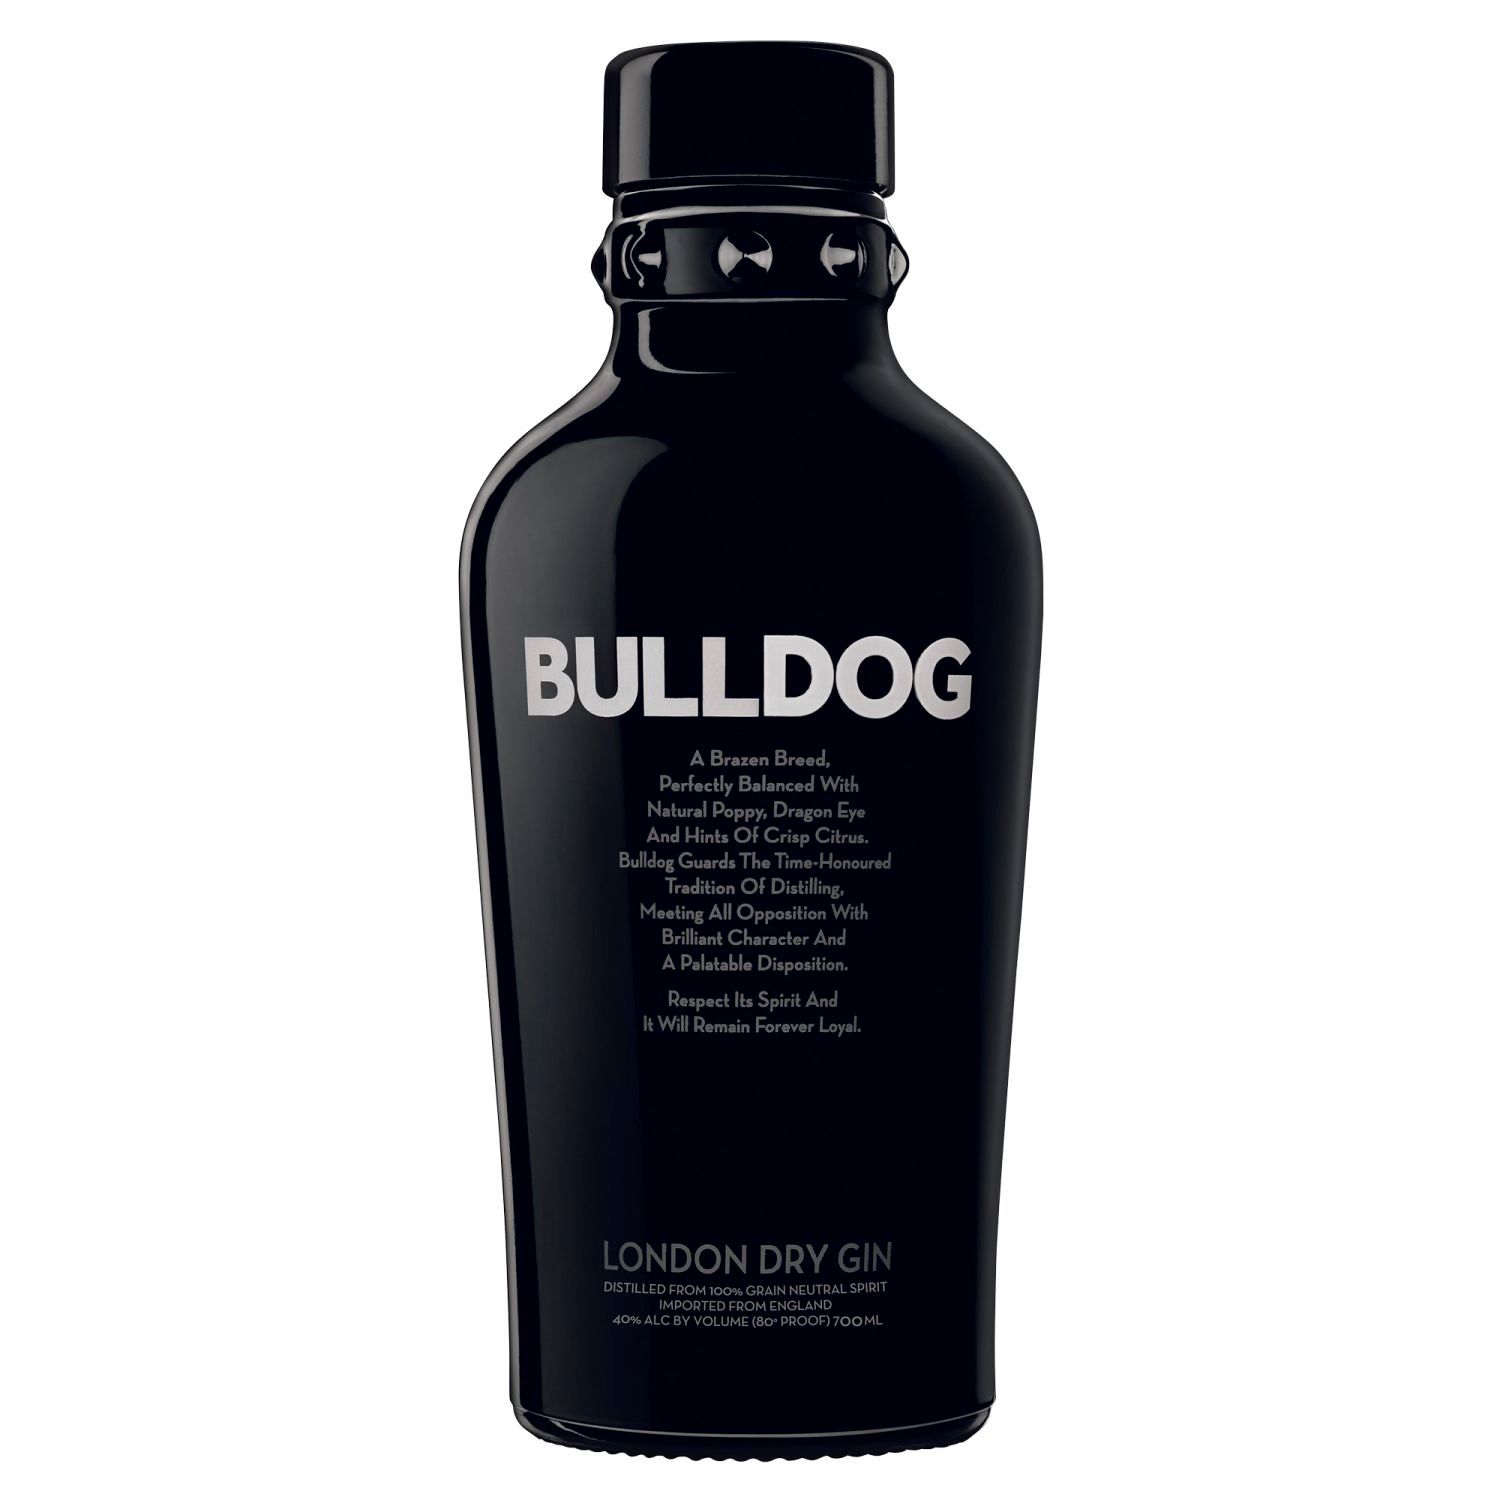 Bulldog Gin is defiantly delicious. The balanced flavour and crisp character of Bulldog Gin is infused with 12 of the rarest, most distinctive botanicals; including Dragon Eye (cousin of the Lychee), French lavender, Italian juniper, Asian lotus leaves, Turkish white poppy and Chinese liquorice. Every batch is quadruple distilled in traditional copper pots at one of the world’s finest gin distilleries that has been producing gin since 1761; crafting Bulldog into one of the world’s smoothest, most mixable gins.<br /> <br />Alcohol Volume: 40.00%<br /><br />Pack Format: 6 Pack<br /><br />Standard Drinks: 22.1</br /><br />Pack Type: Bottle<br /><br />Country of Origin: England<br />